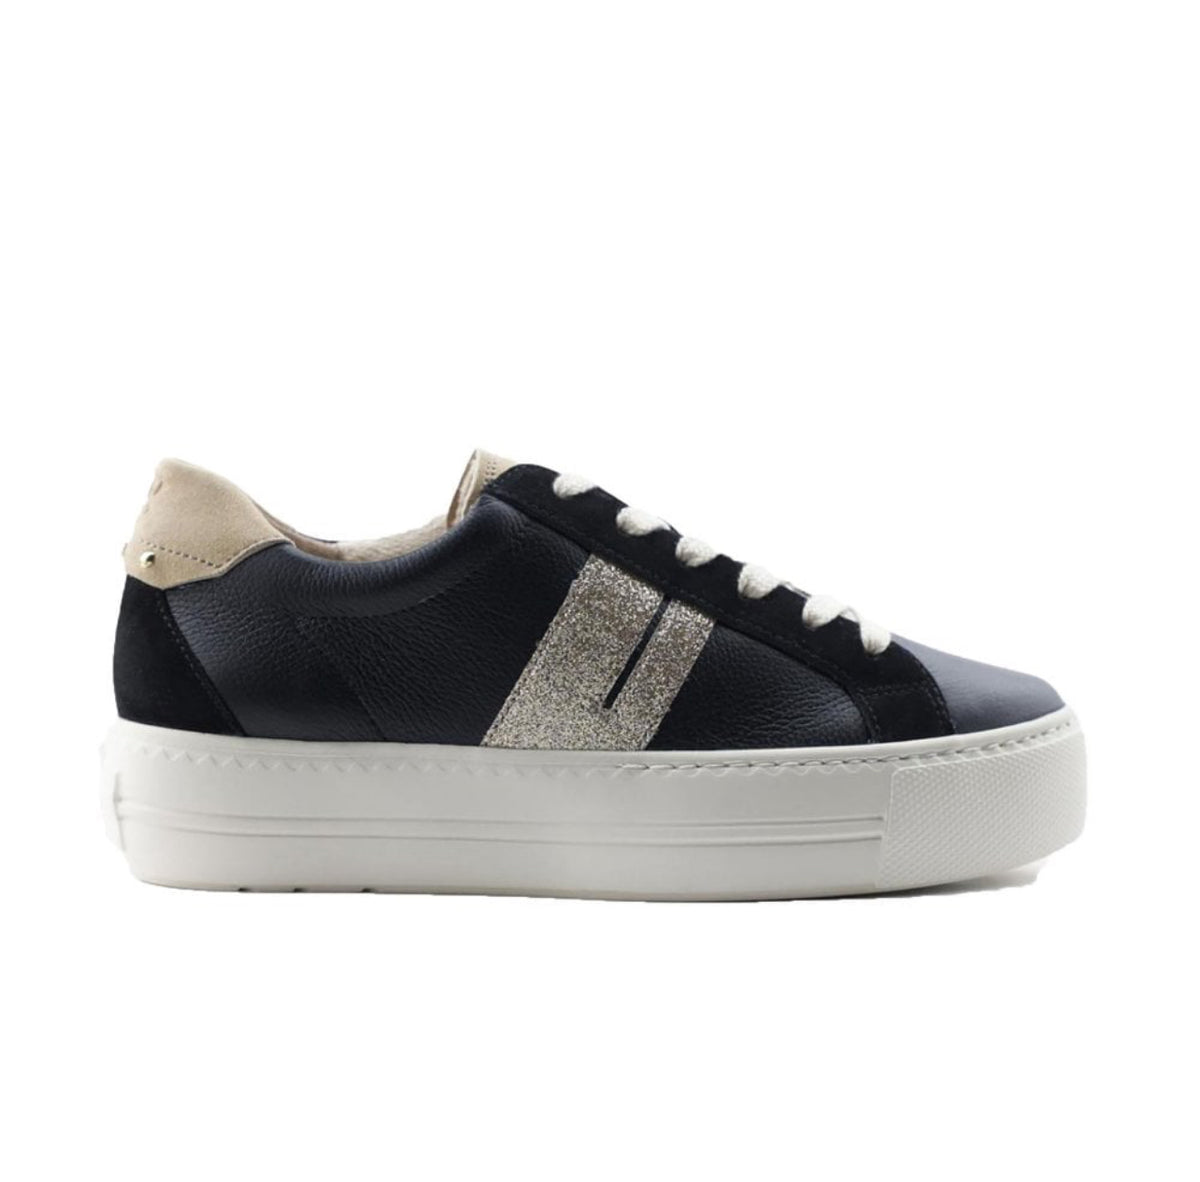 Paul Green - 5330 Black and Gold Trainer